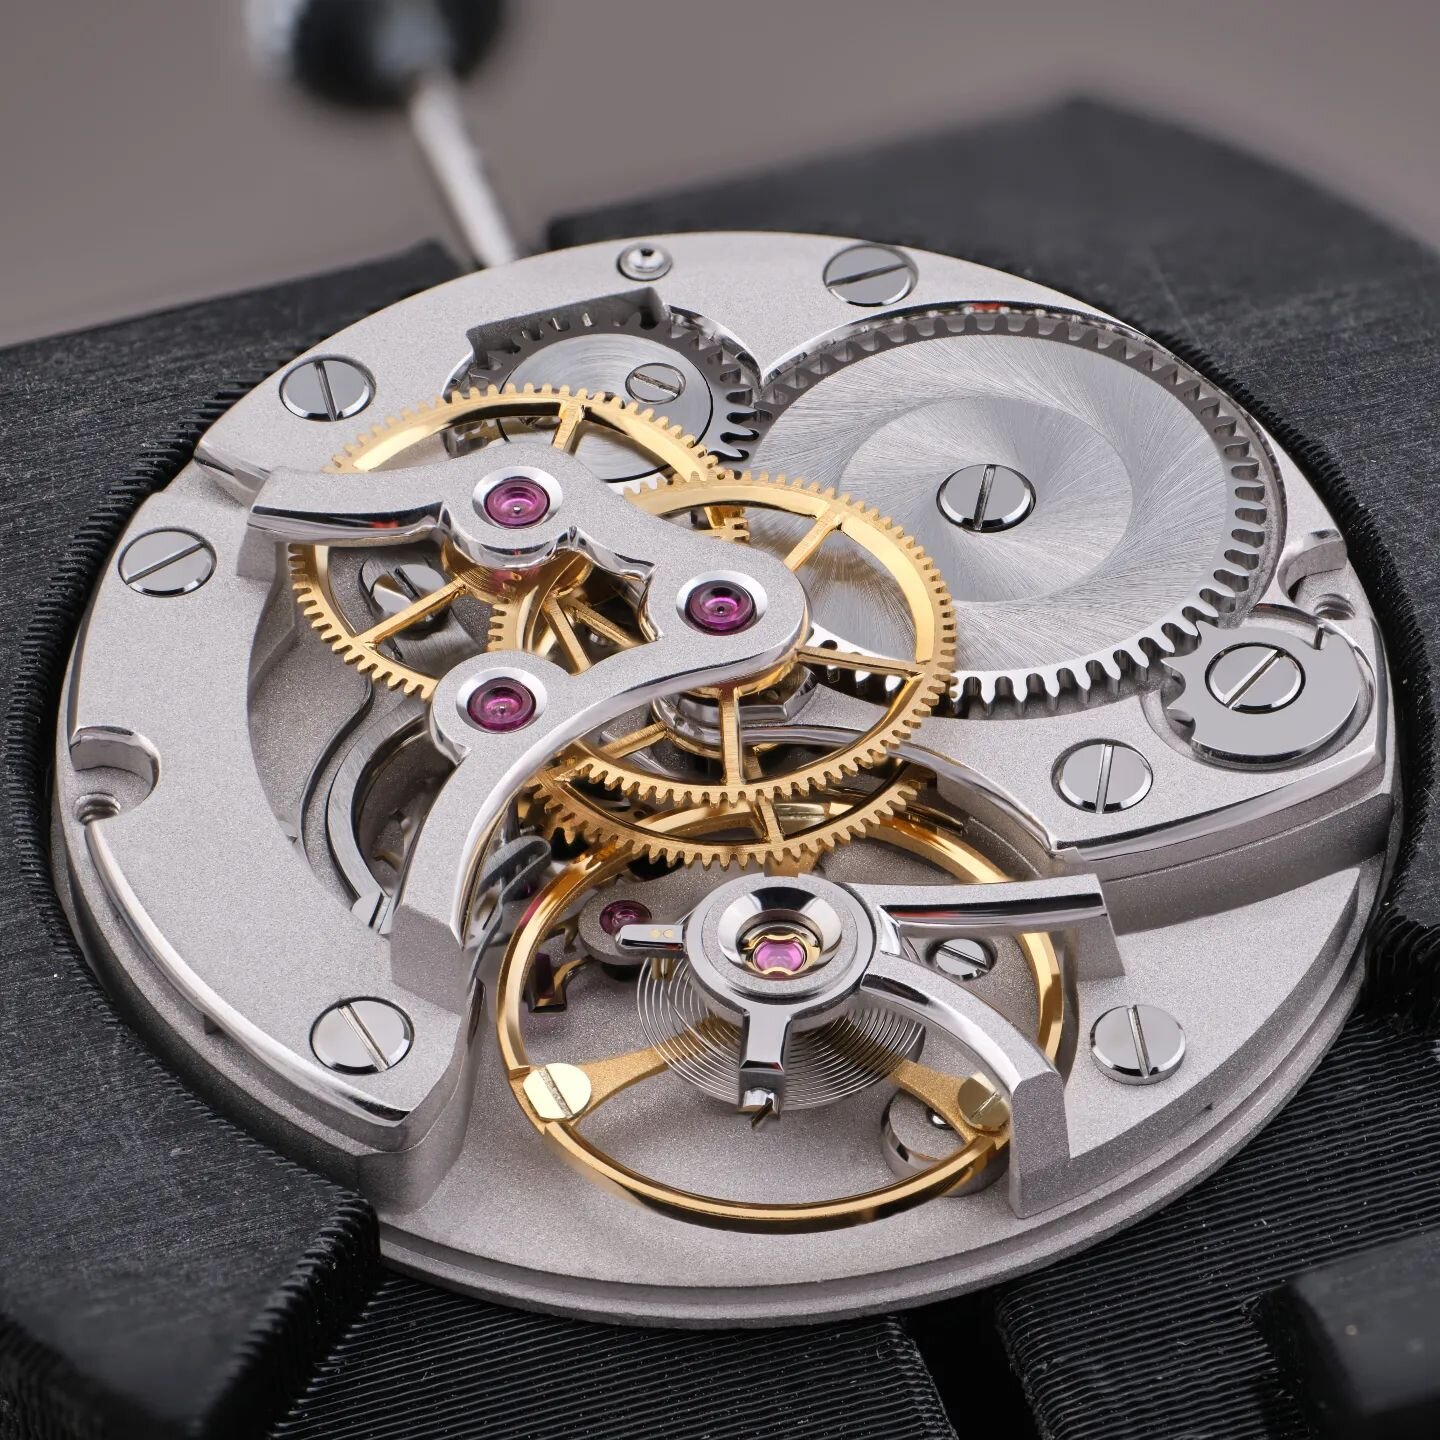 Our very first movement: JU26-01. What do you think about this architecture?

For any detailed informations and orders: info@junge-uhrmacher.de

Photo by @roykohlsdorf&nbsp;

#junge #jungeuhrmacher #prestige #independentwatchmaking #watchmaker #watch